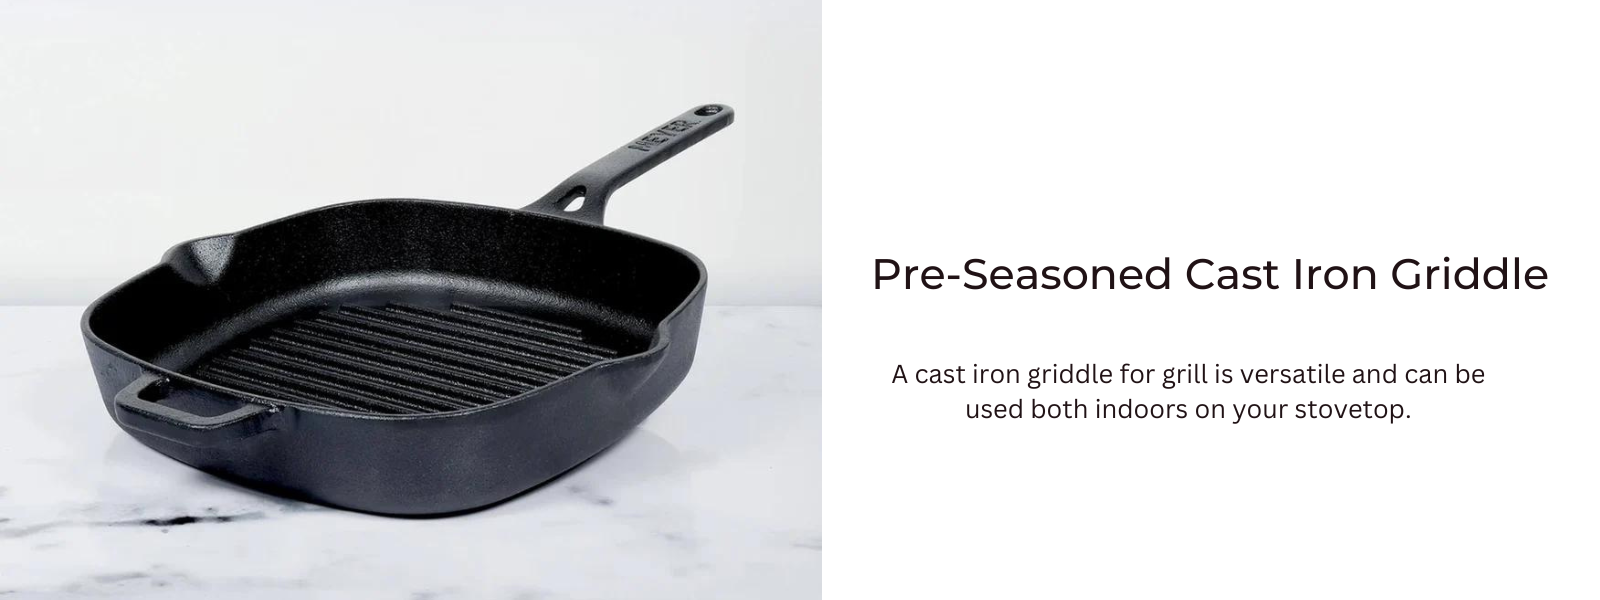 Pre-Seasoned Cast Iron Griddle For Grill